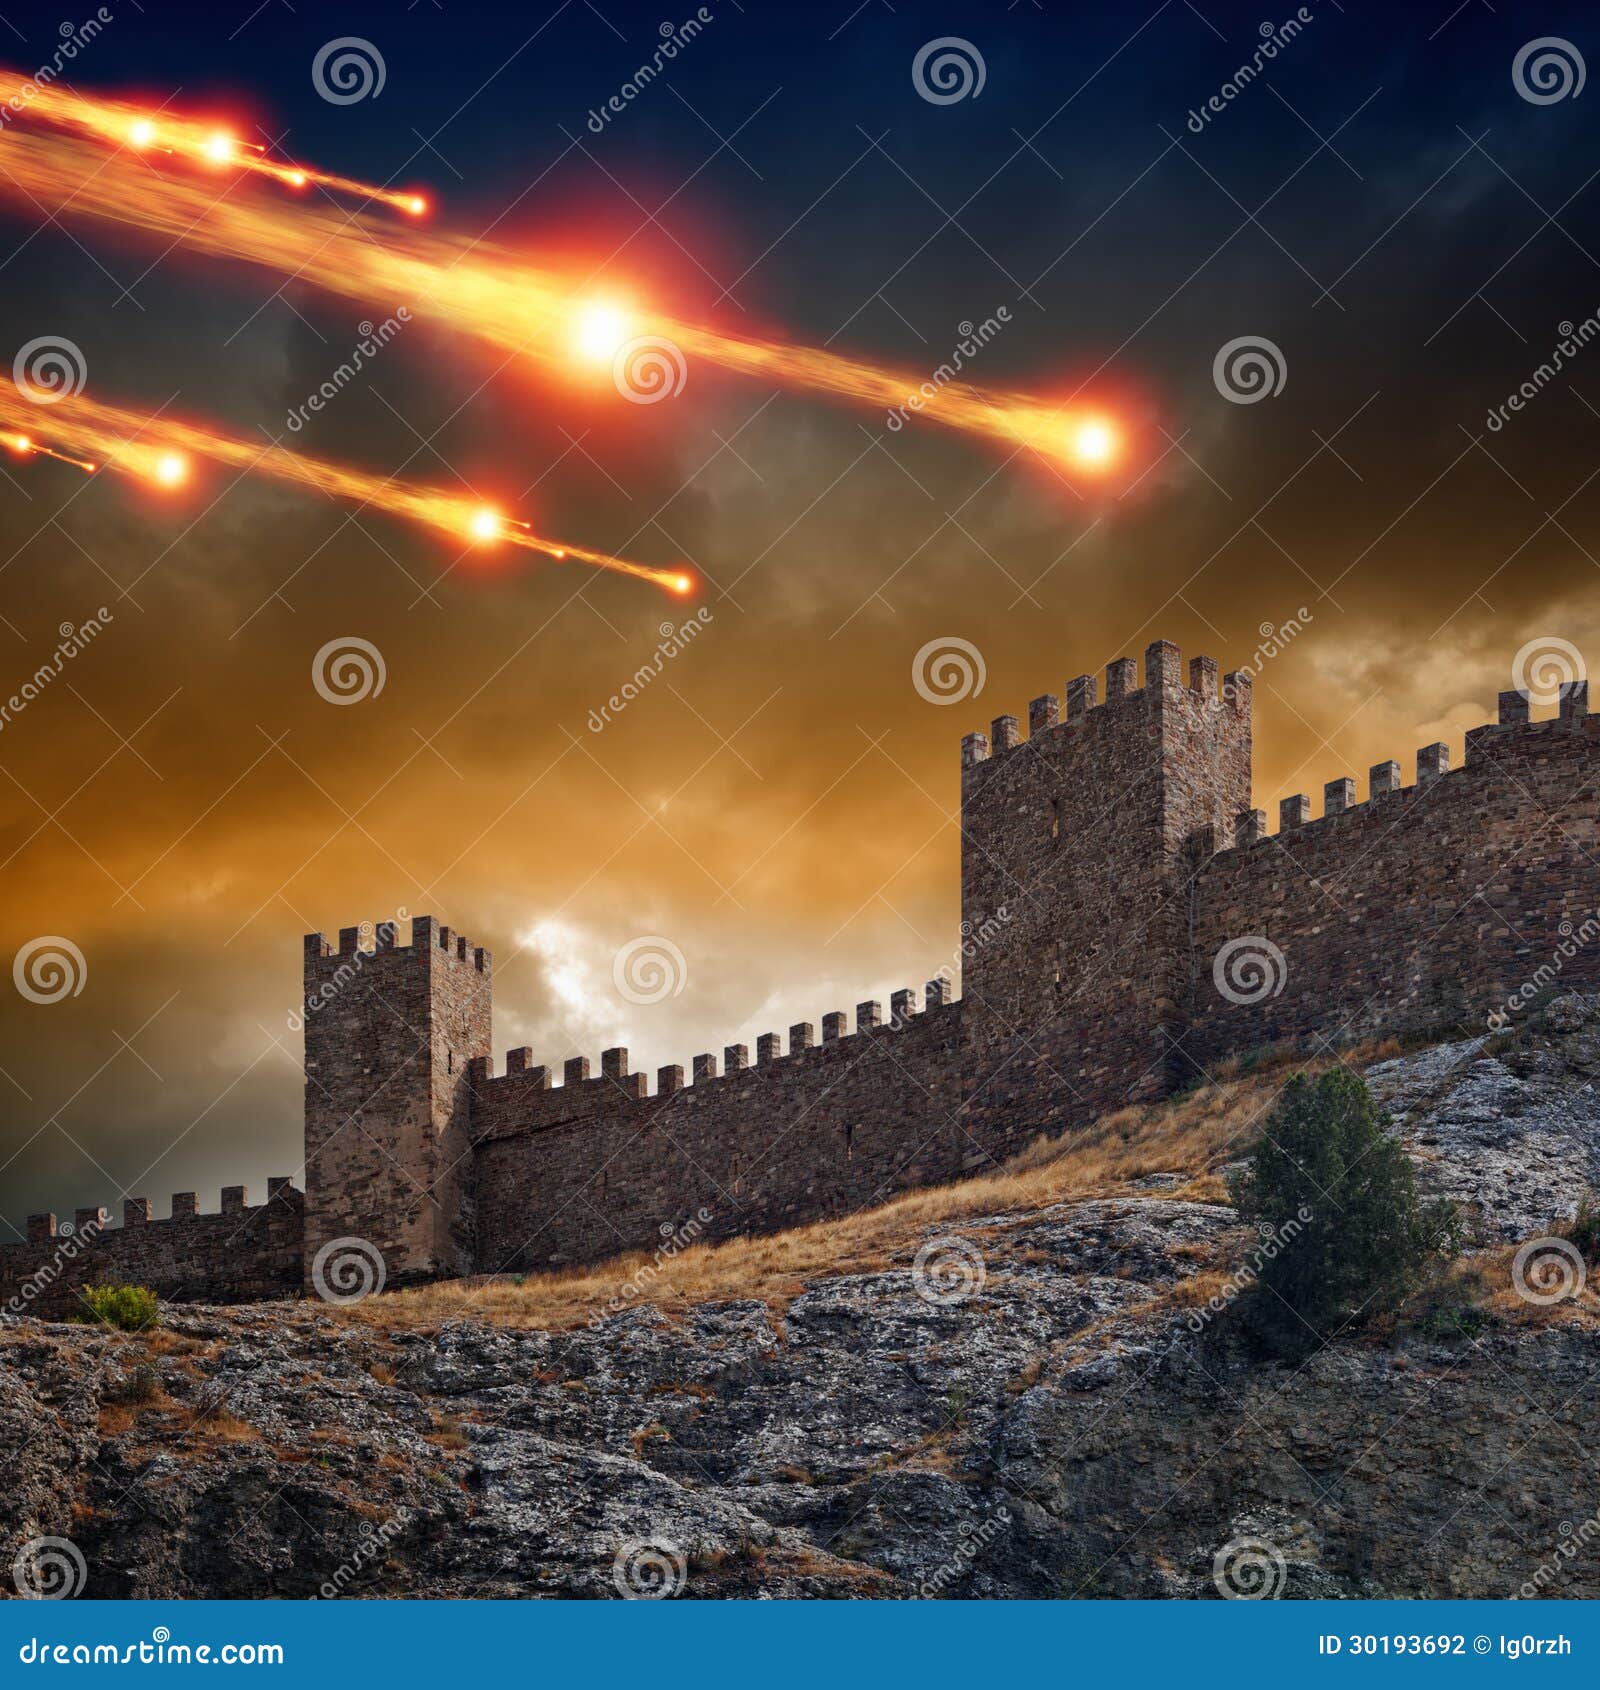 old fortress, tower under attack